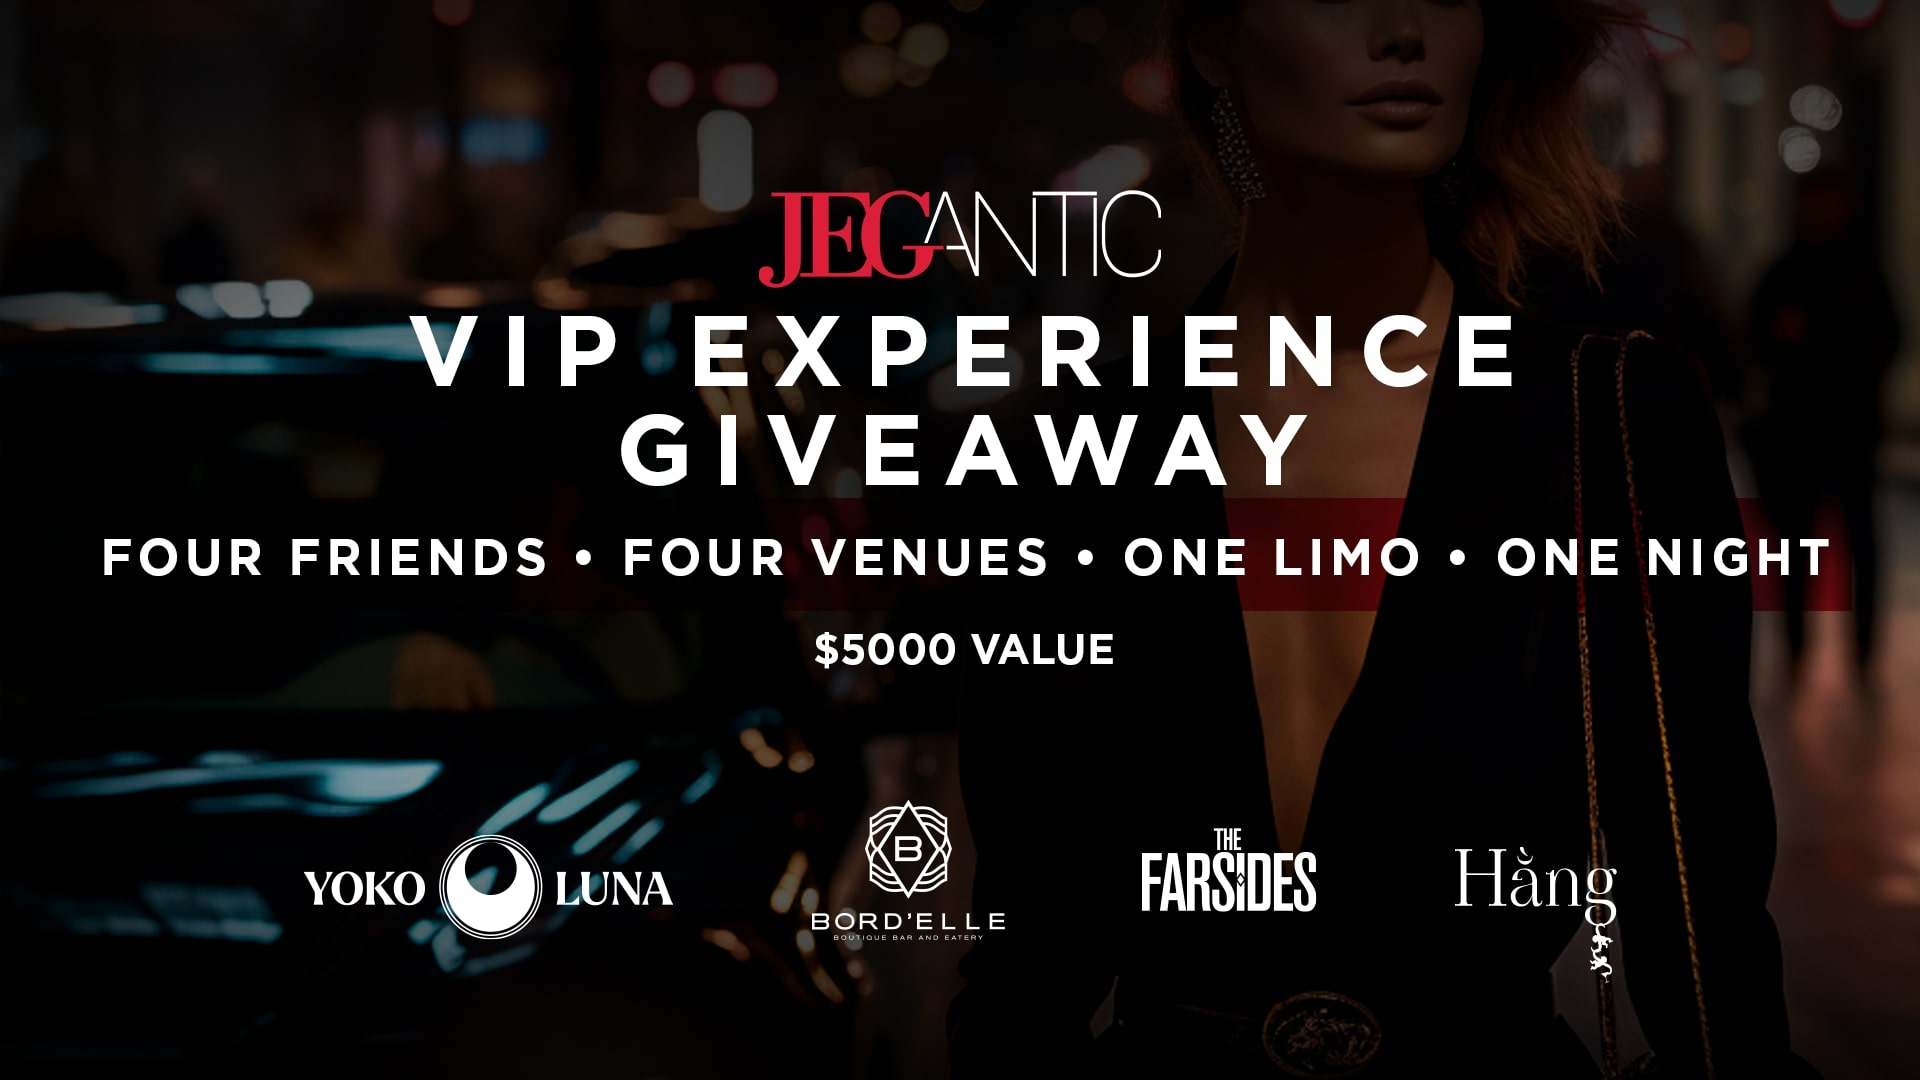 Jegantic VIP experience giveaway banner